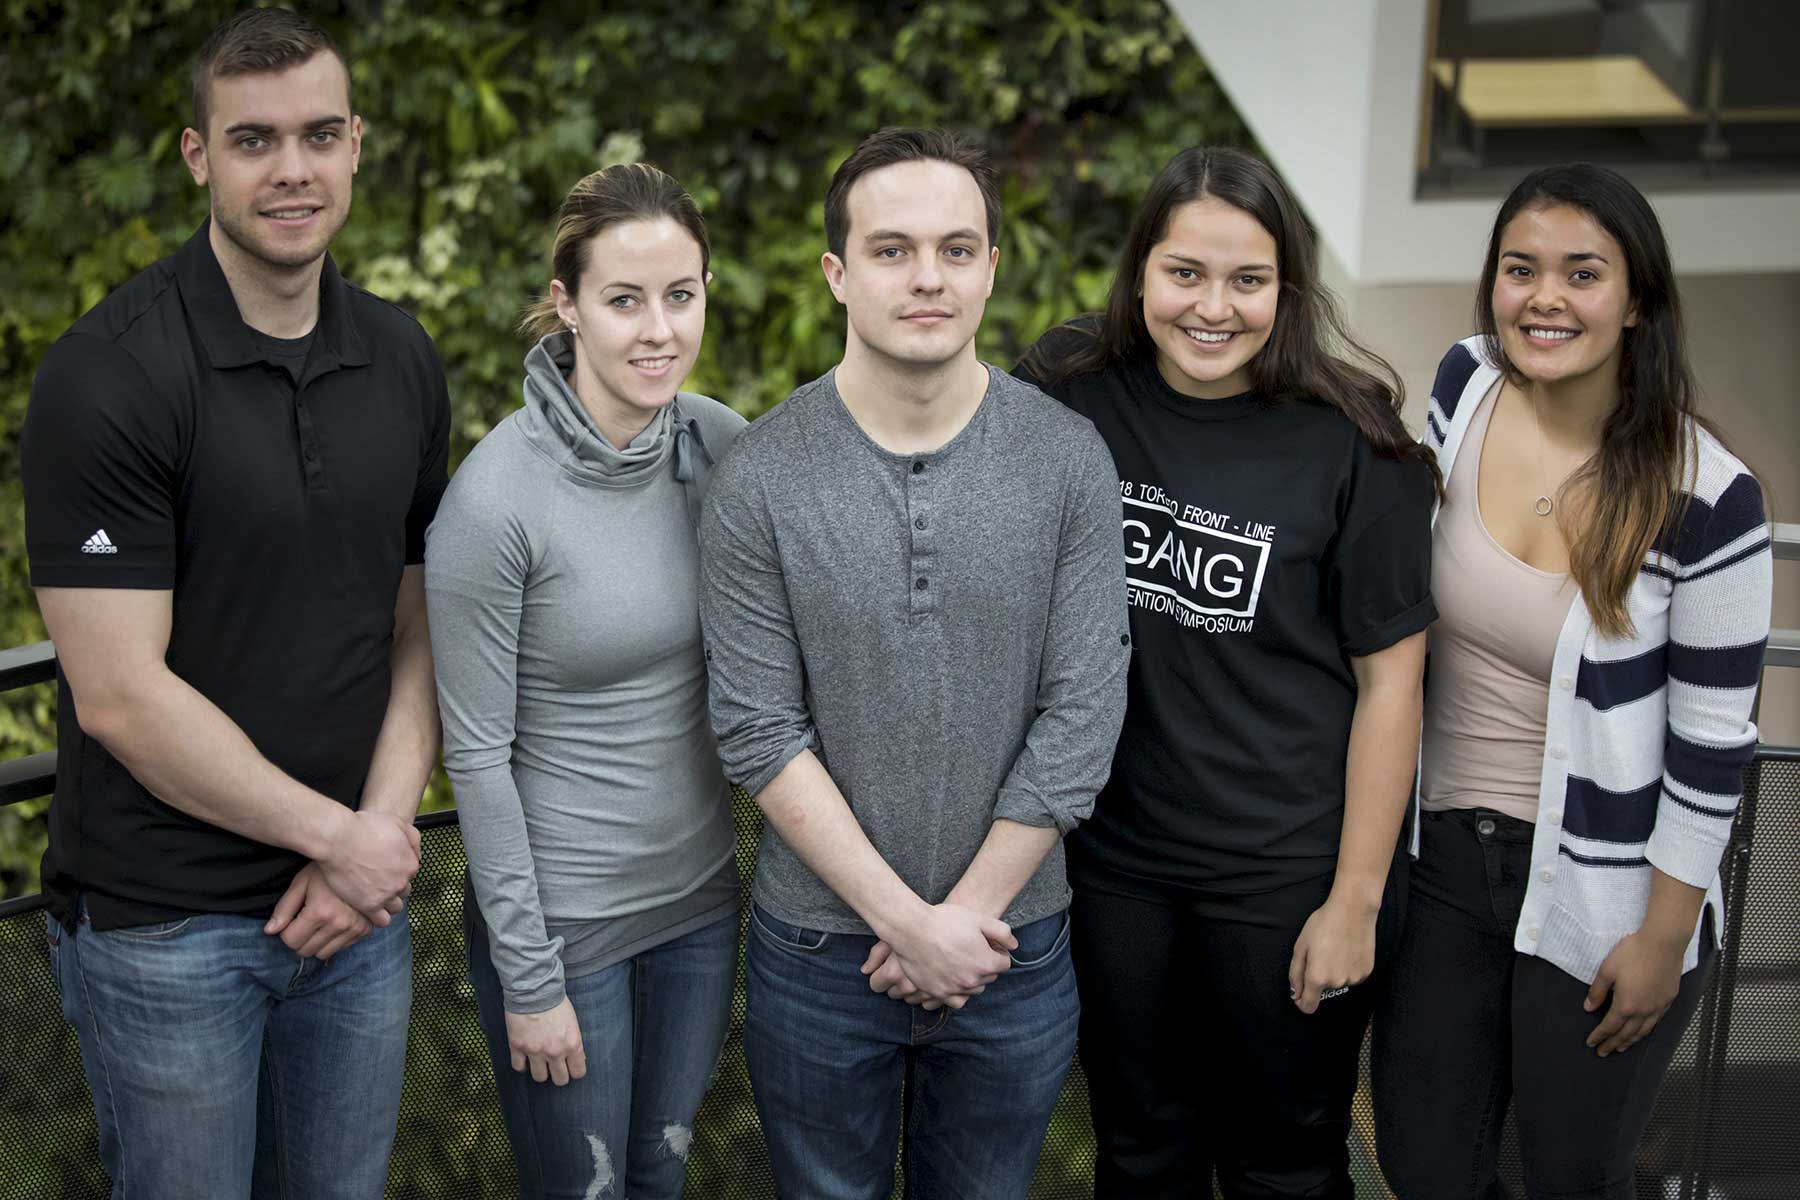 Five of the students involved in gang research pose for a photo